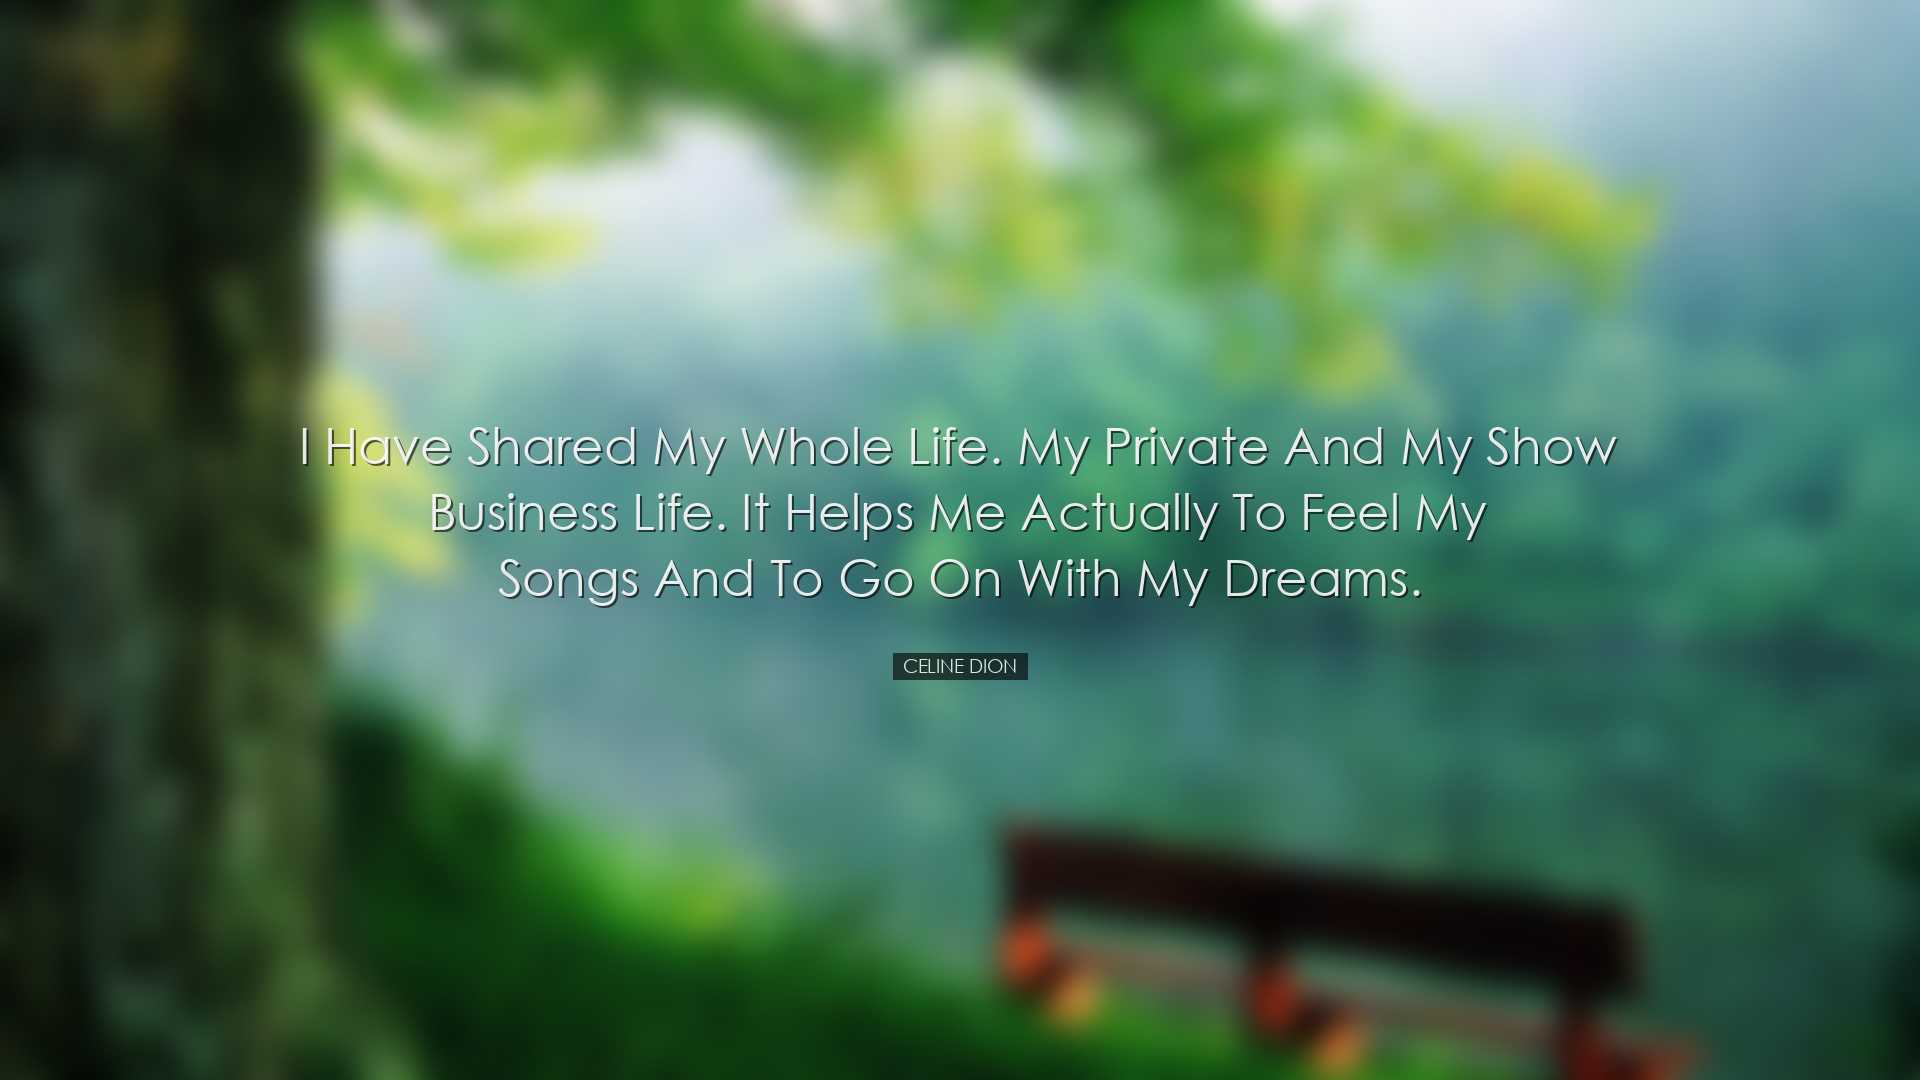 I have shared my whole life. My private and my show business life.